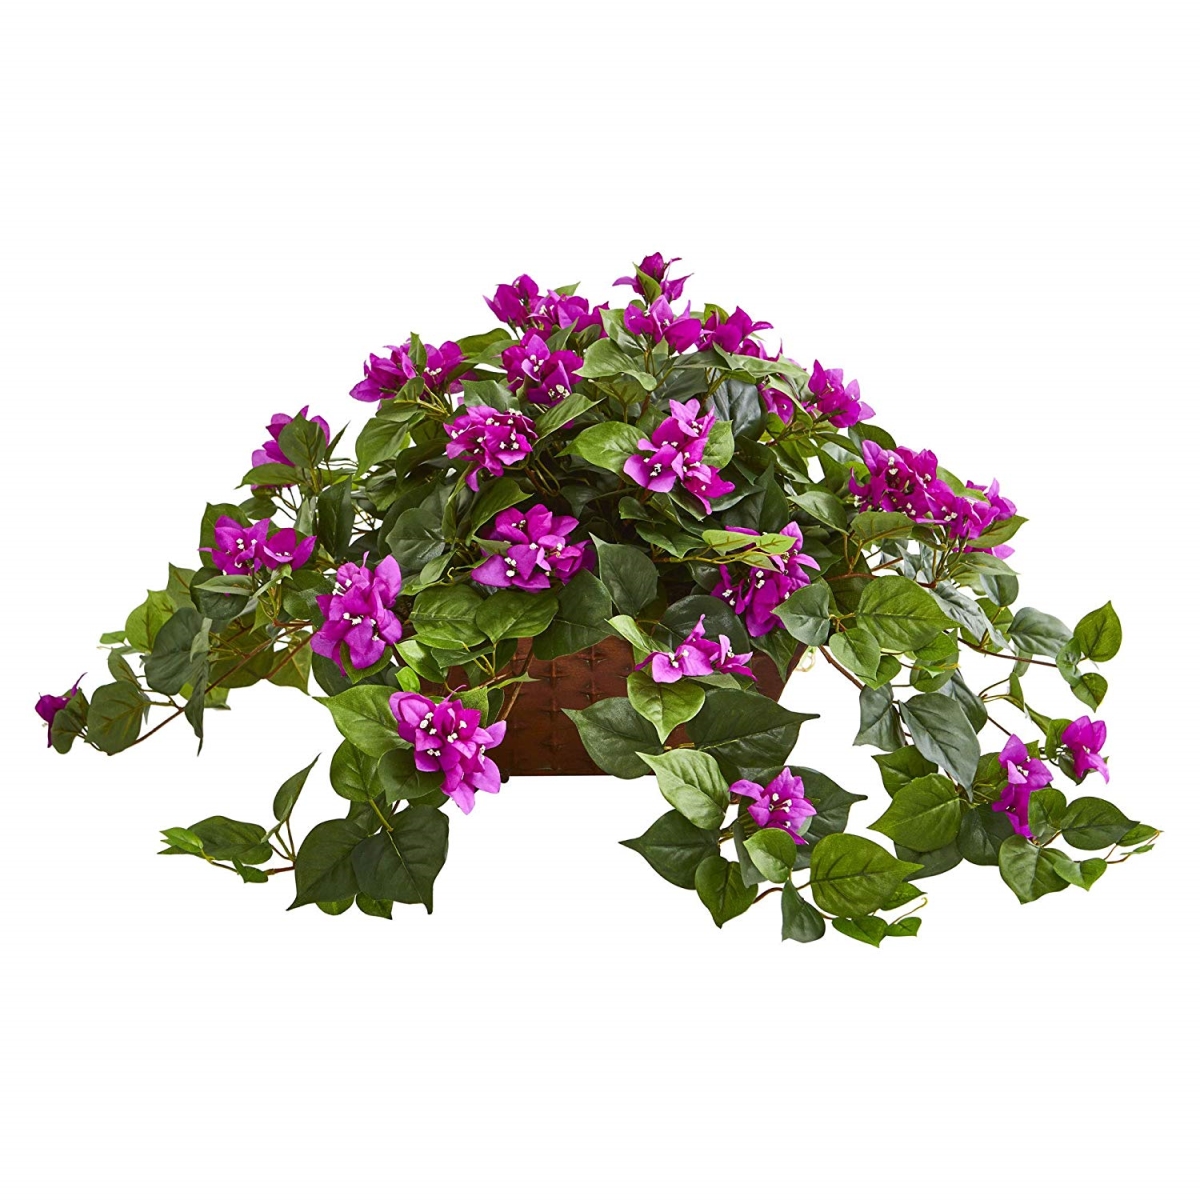 Picture of Nearly Natural 8374 Bougainvillea Artificial Plant in Hanging Basket